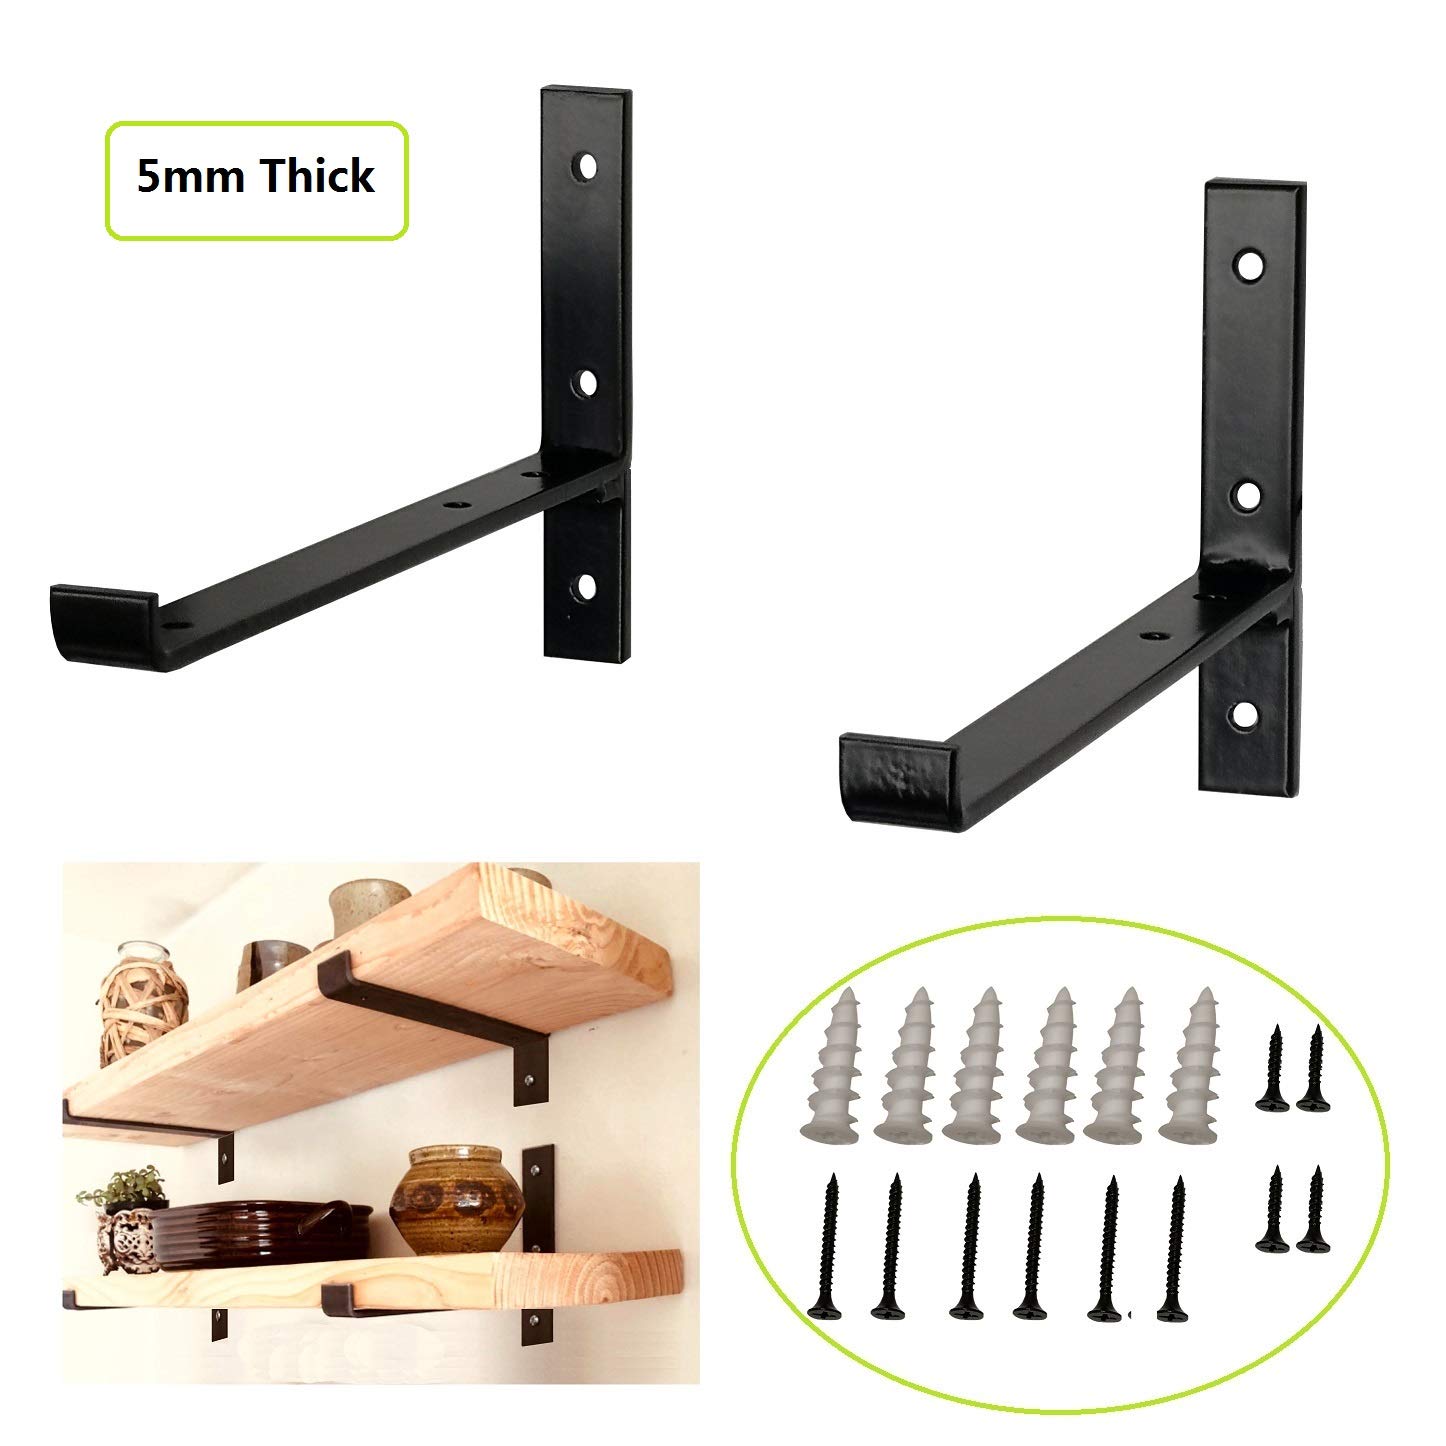 lip hook brackets for shelves iron shelf dgtl floating decorative wall hangers mounted hanging angle pack home shoe cabinet ikea bookcase that hold weight shelving units cape town